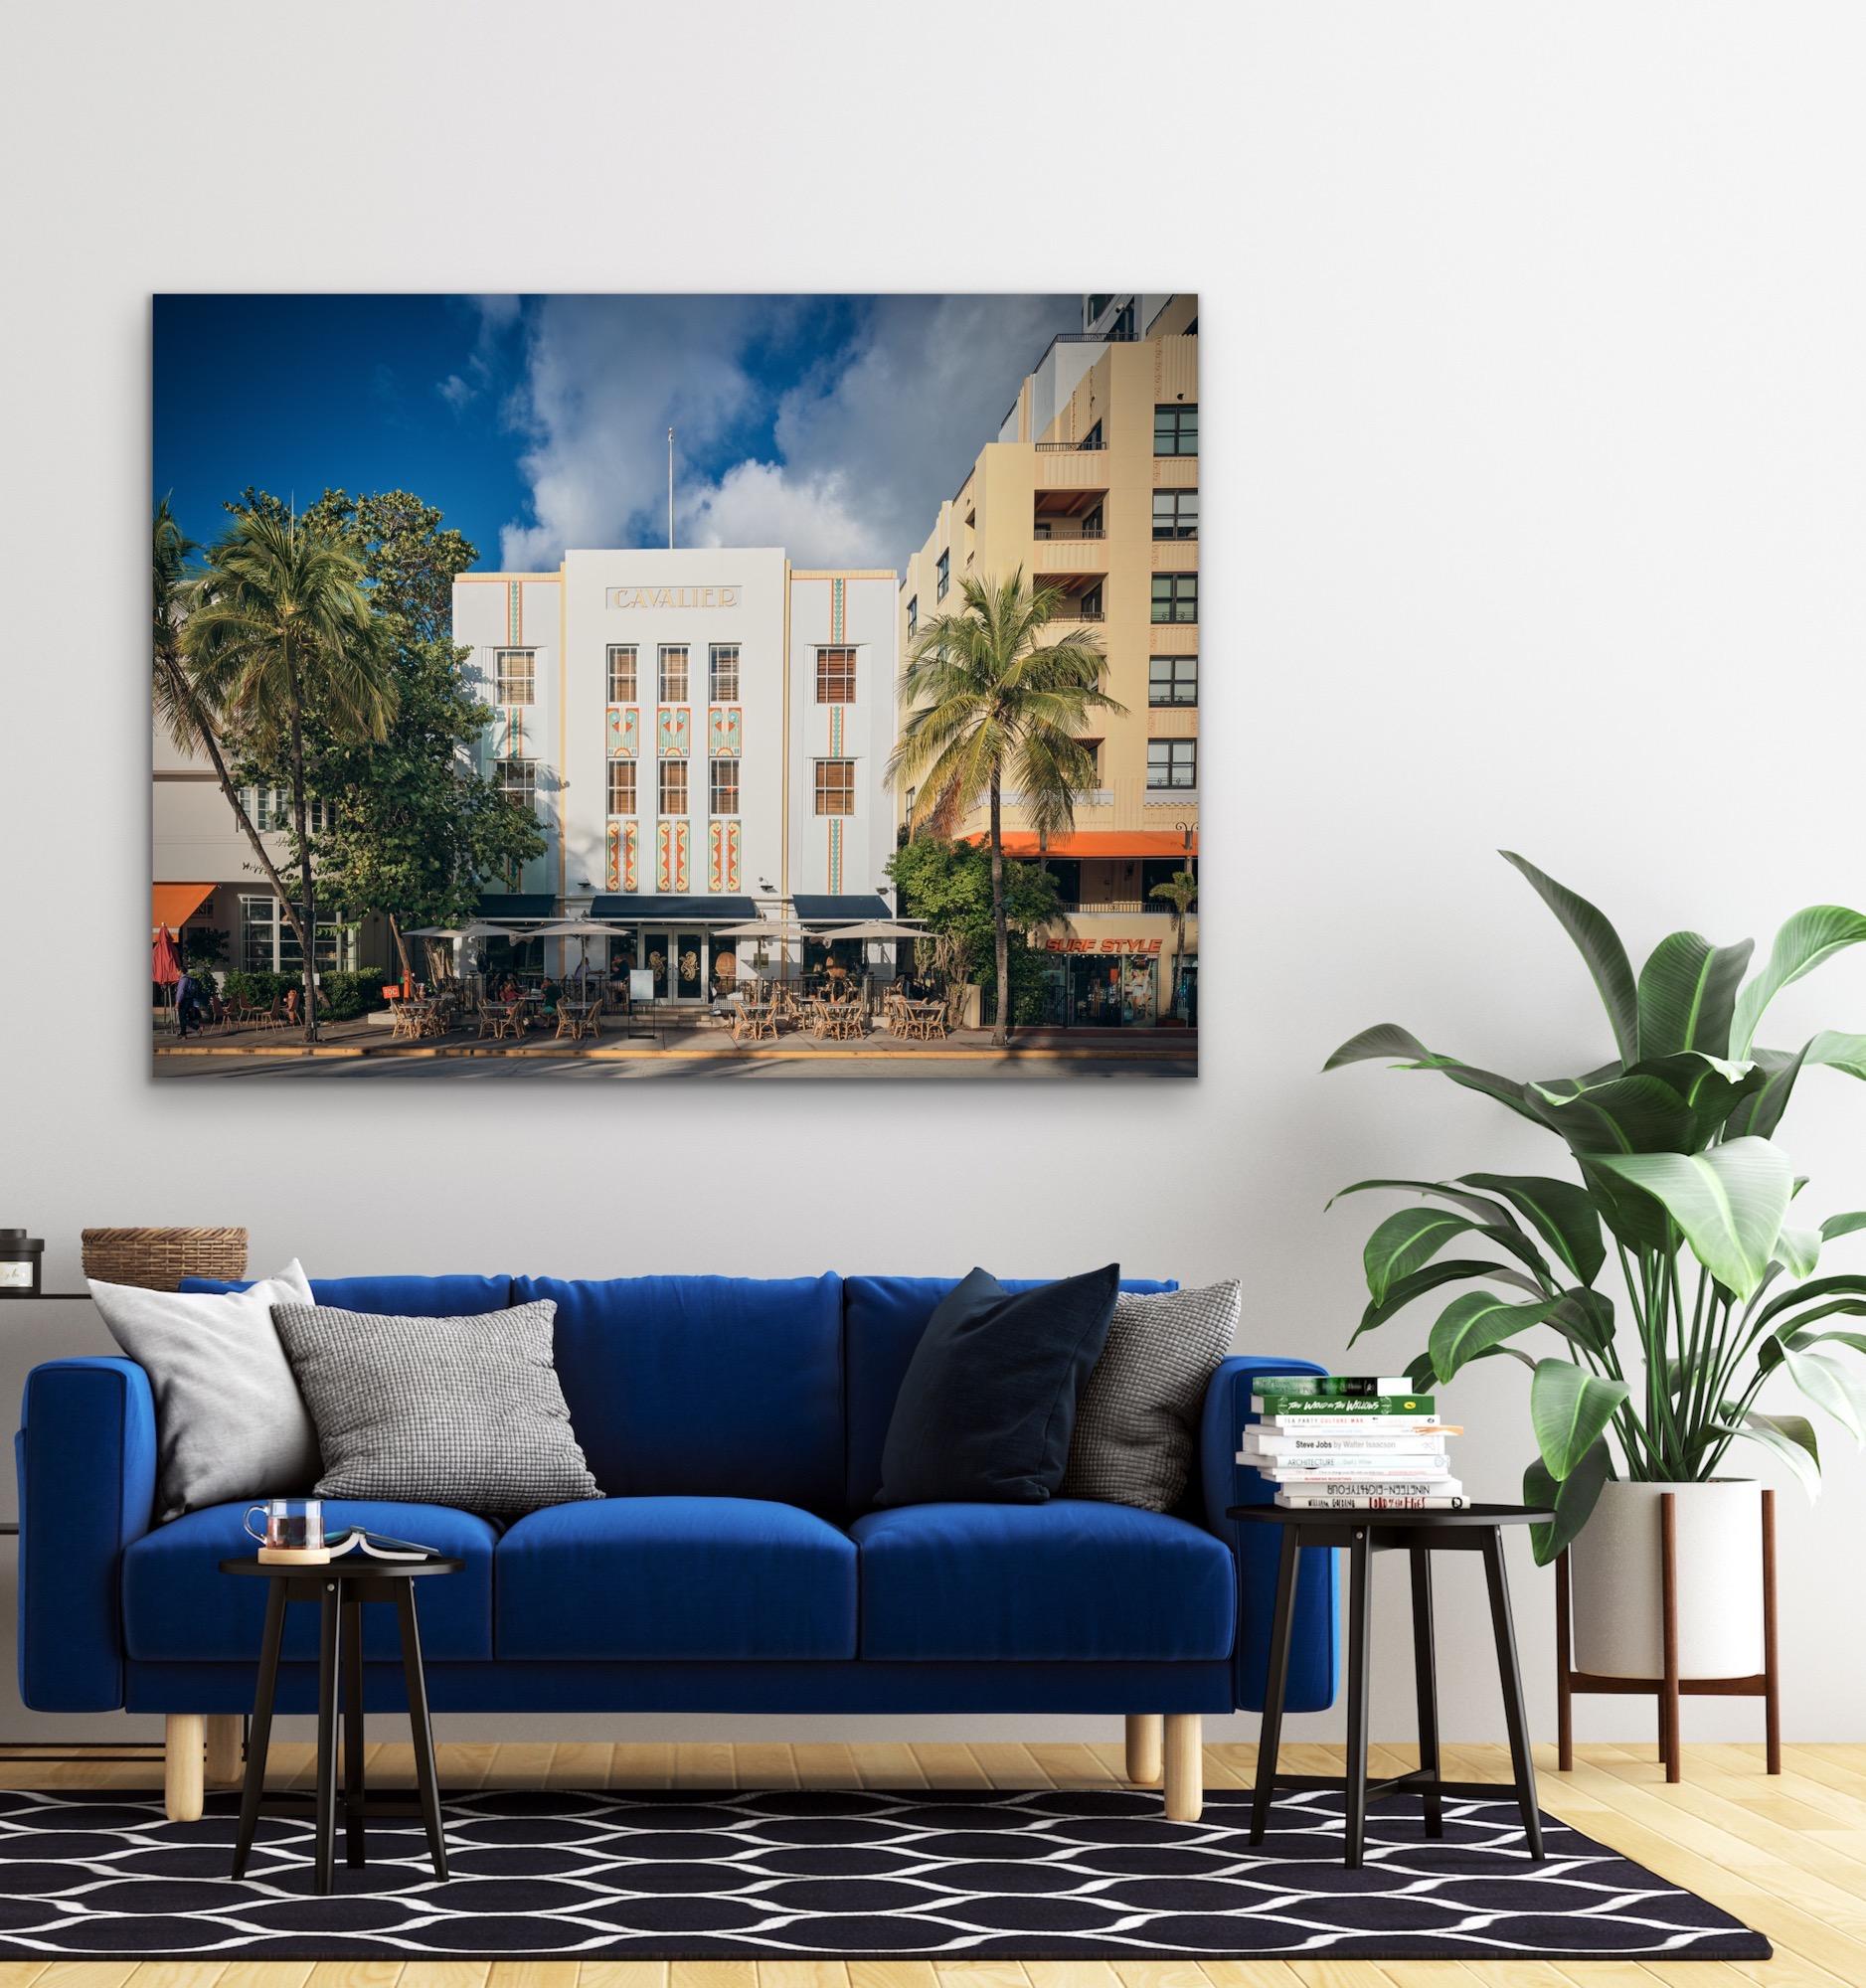 This contemporary urban photograph by Peter Mendelson captures the Deco style Cavalier building in Miami Beach, Florida, with dining tables and umbrellas, and palm trees along the sidewalk. 

This is a metal sublimation print. The frame on an